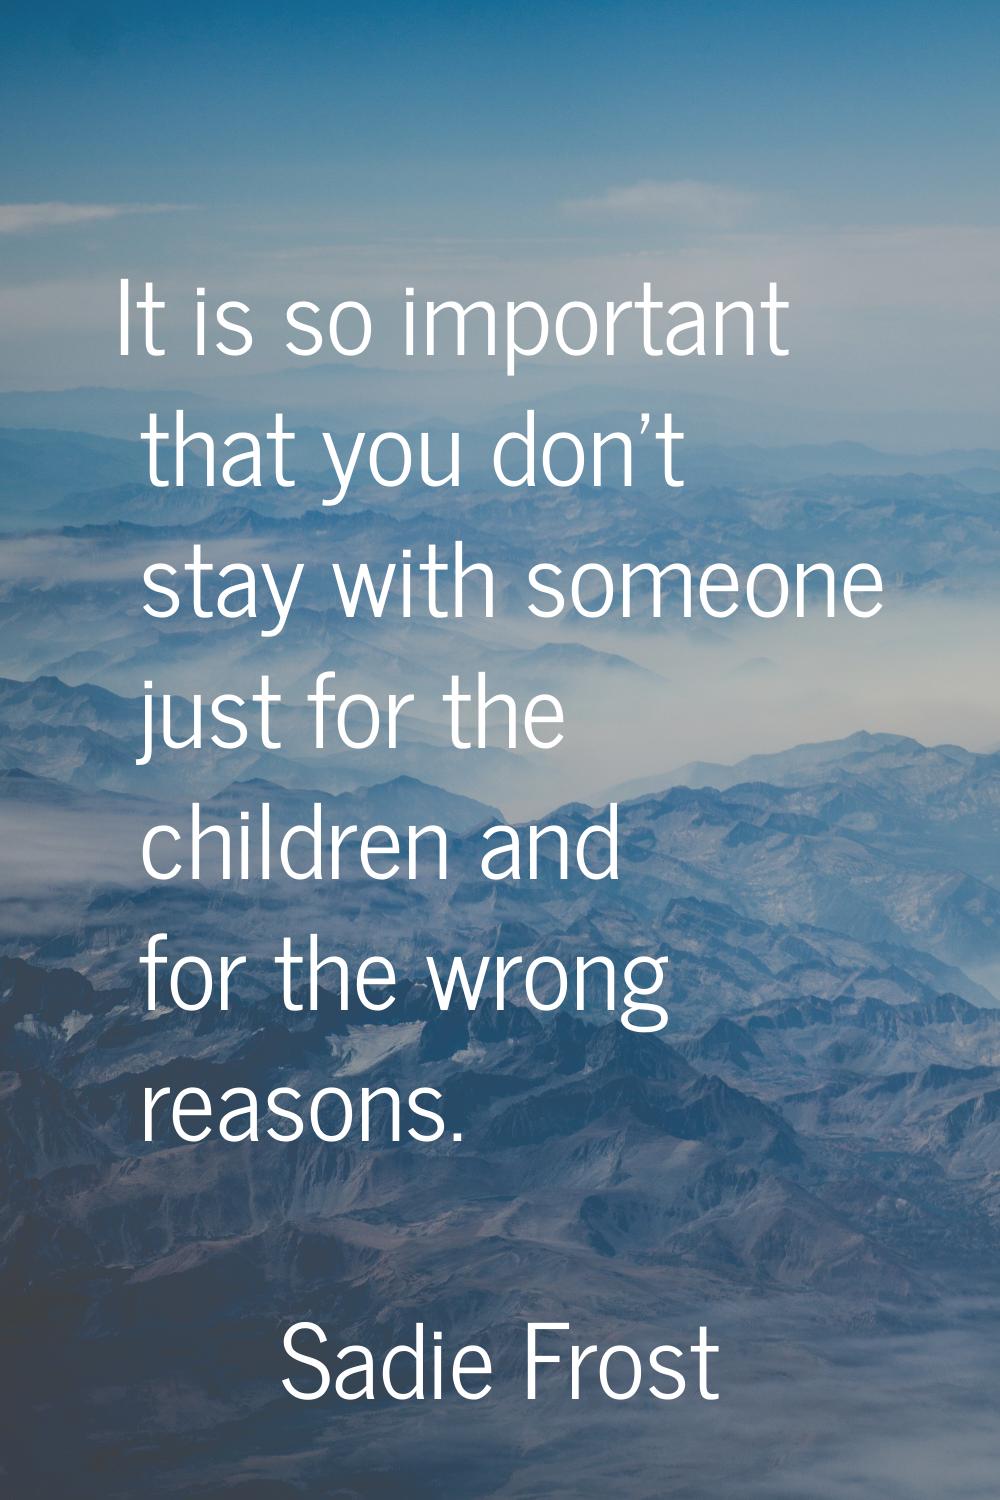 It is so important that you don't stay with someone just for the children and for the wrong reasons